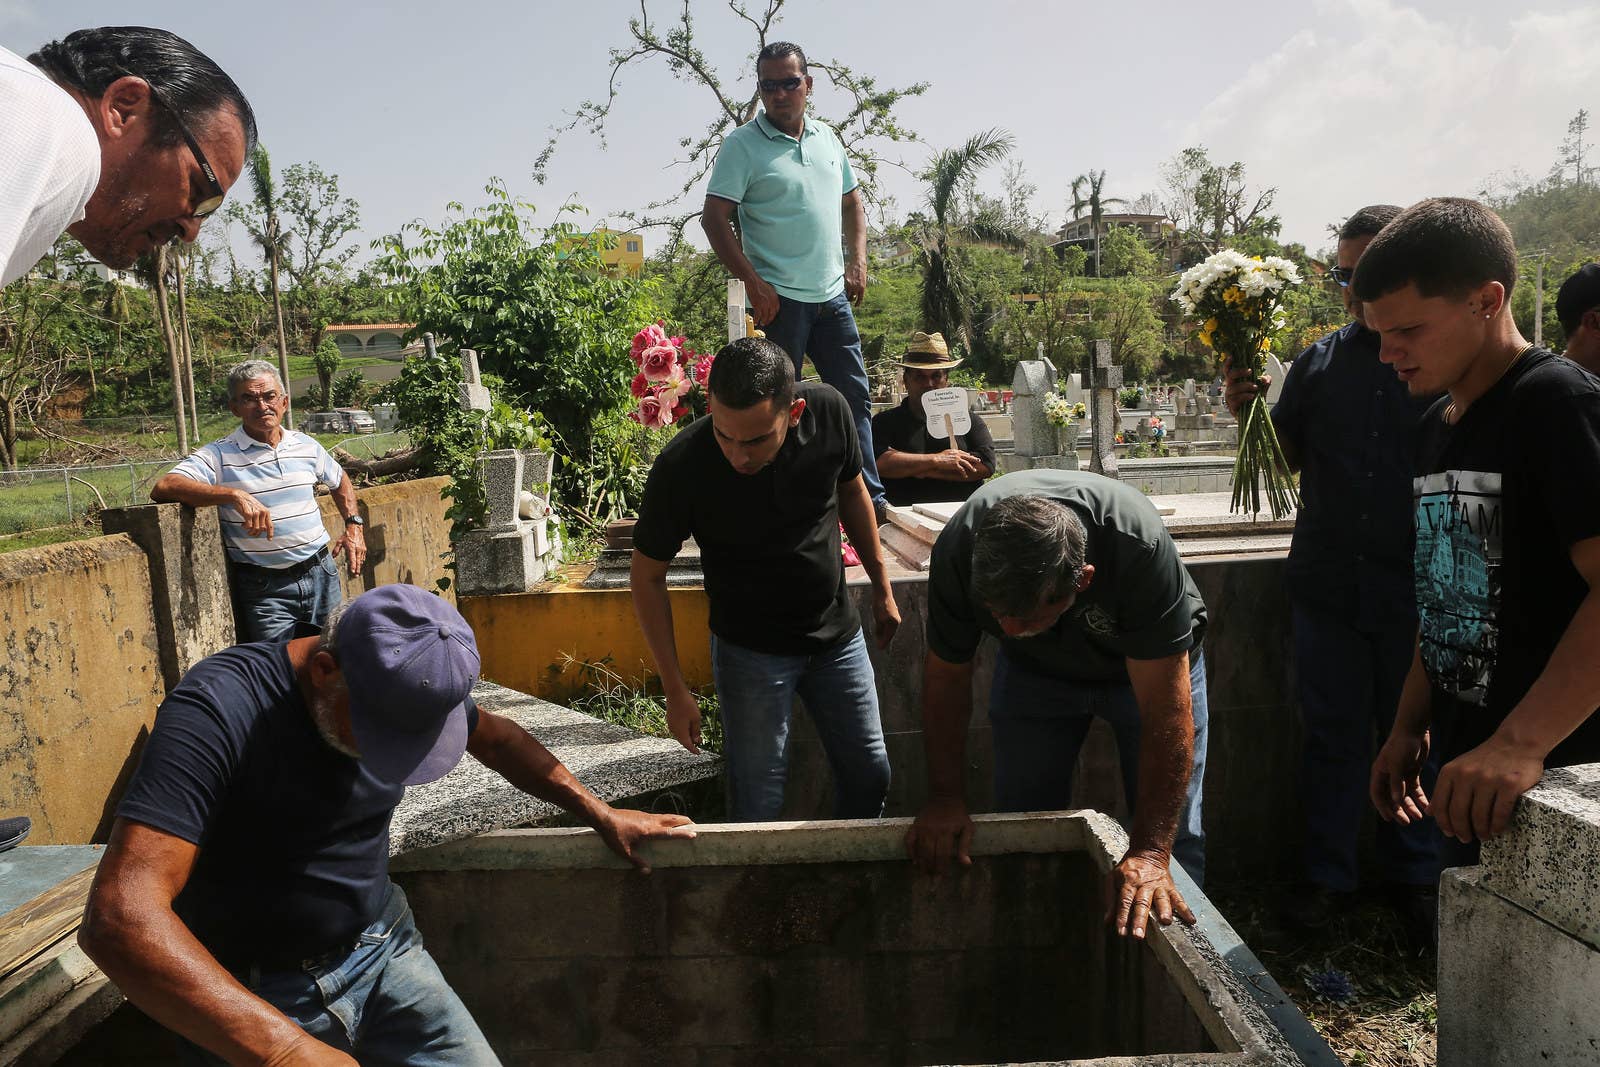 Mourners and cemetery workers gather at the gravesite on Oct. 19 in Utuado, Puerto Rico.